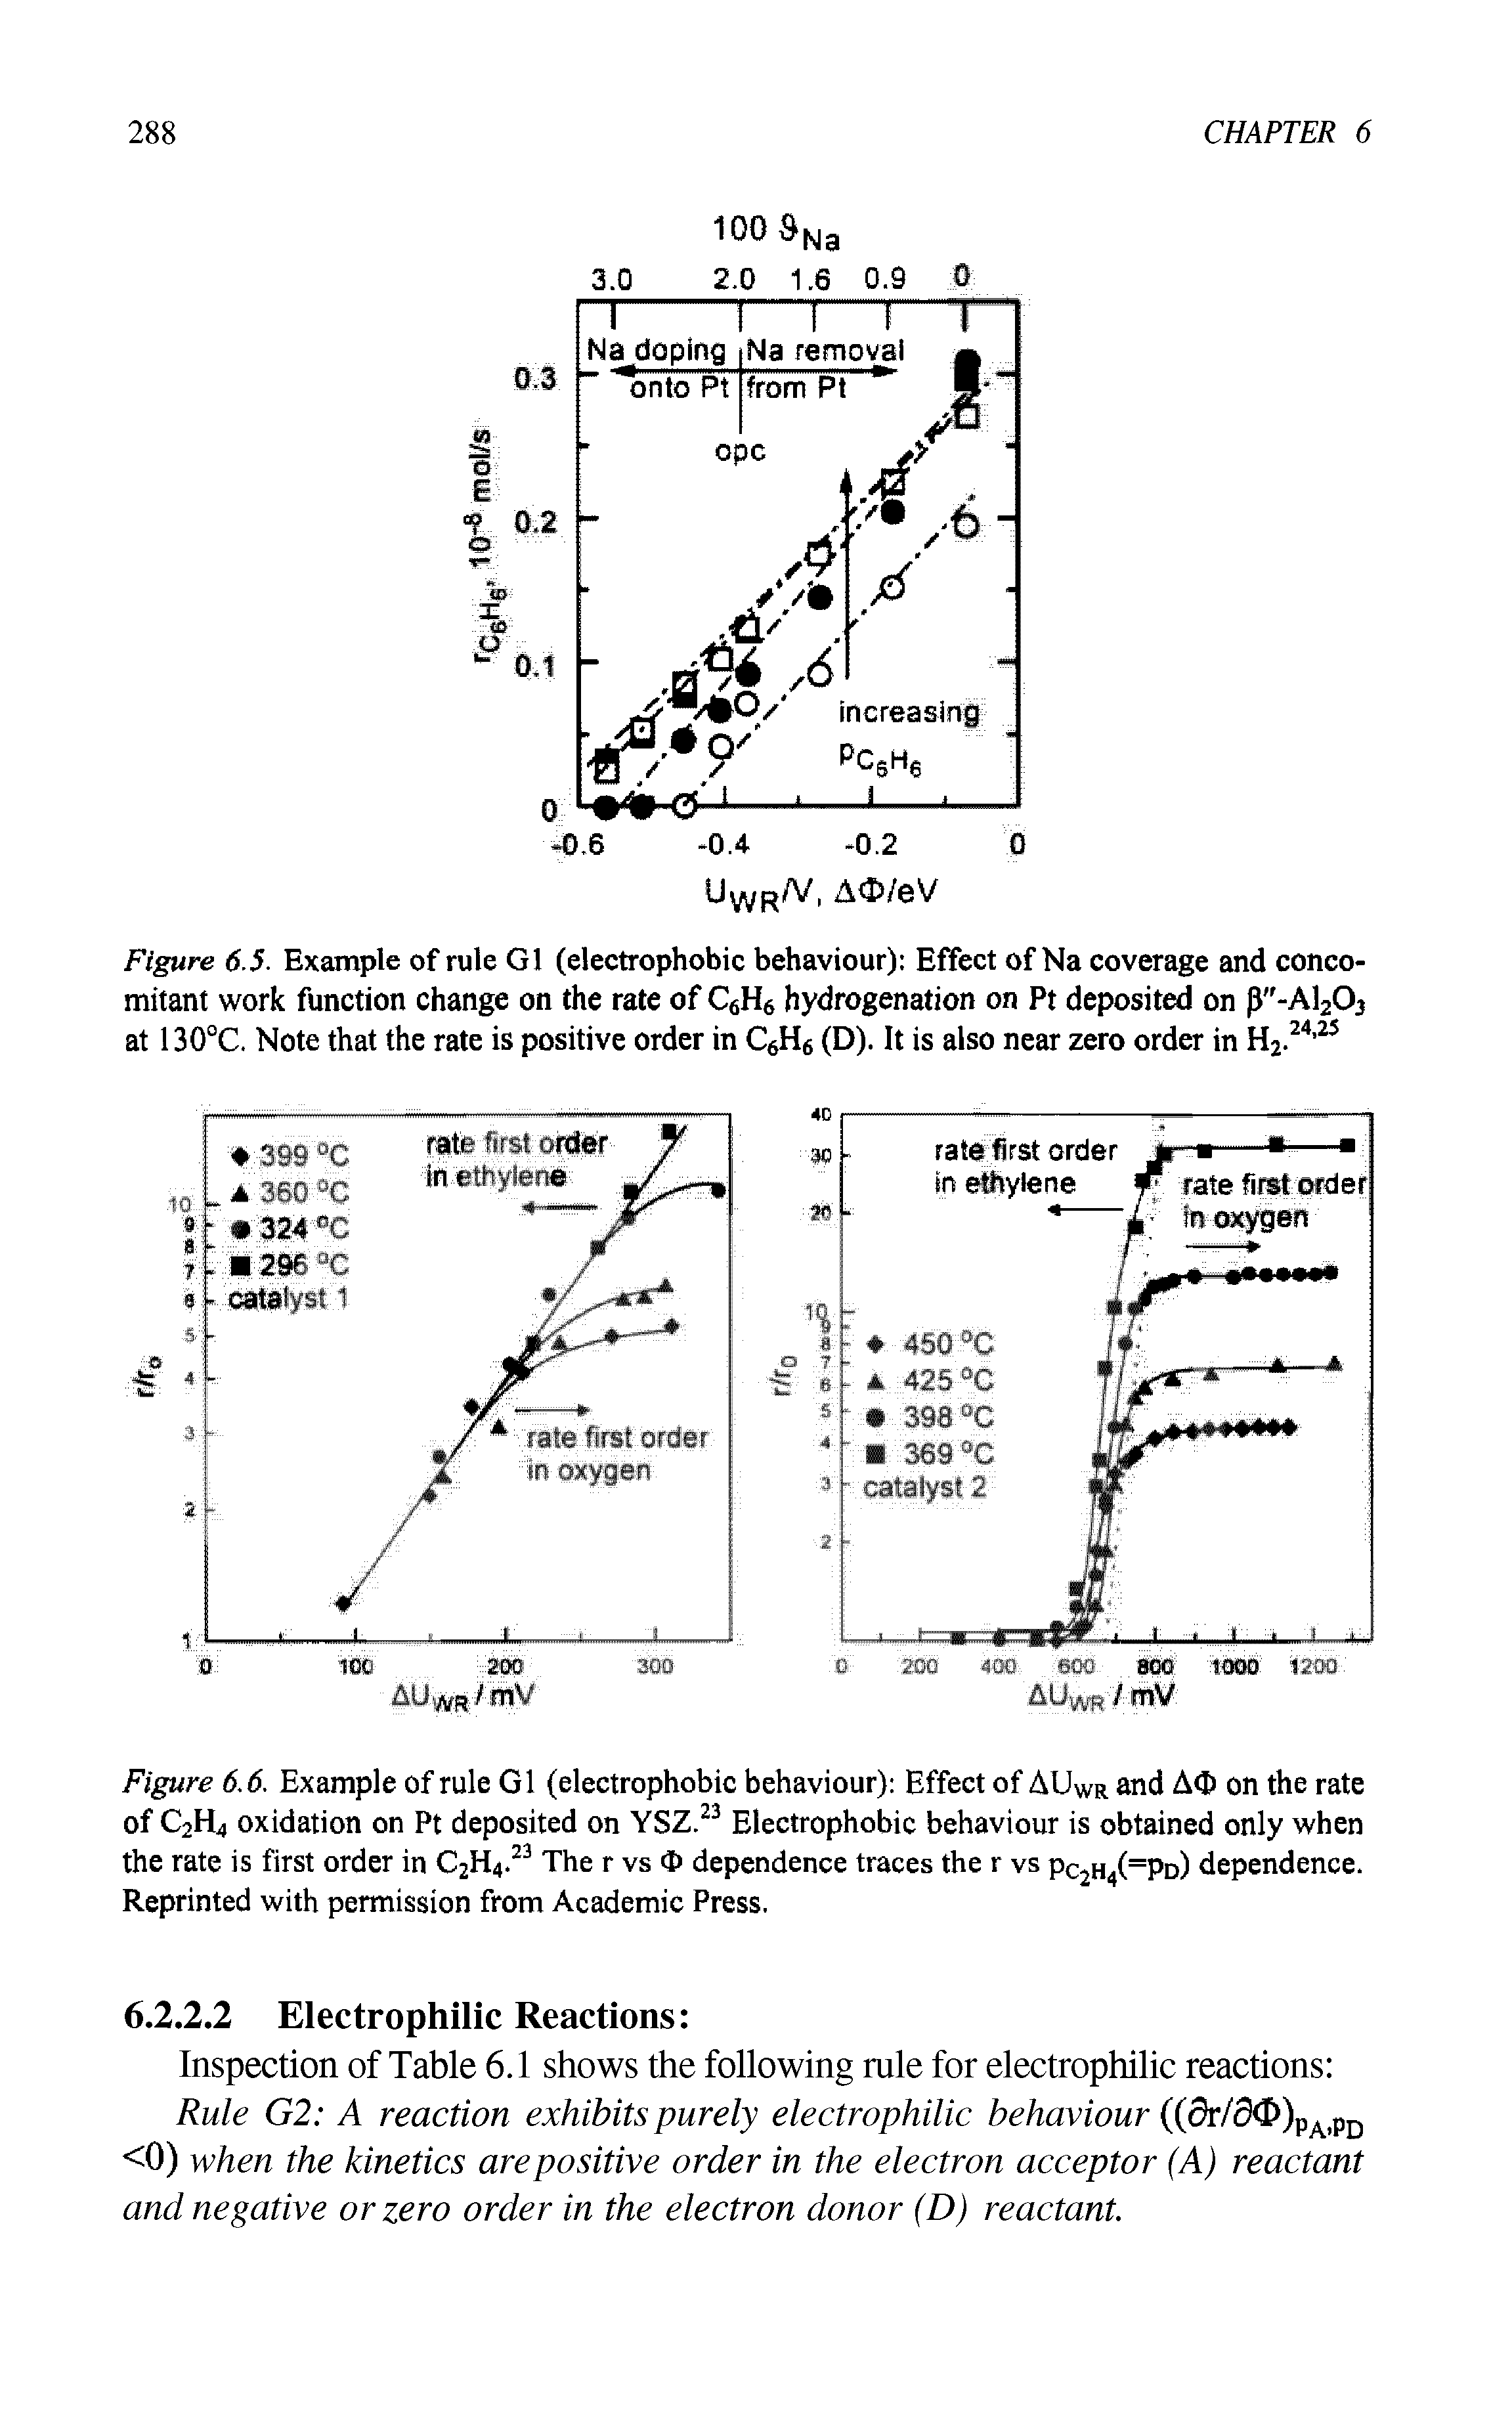 Figure 6.6. Example of rule G1 (electrophobic behaviour) Effect of AUWr and A<J) on the rate of C2H4 oxidation on Pt deposited on YSZ.23 Electrophobic behaviour is obtained only when the rate is first order in C2H4.23 The r vs dependence traces the r vs Pc2h4(=Pd) dependence. Reprinted with permission from Academic Press.